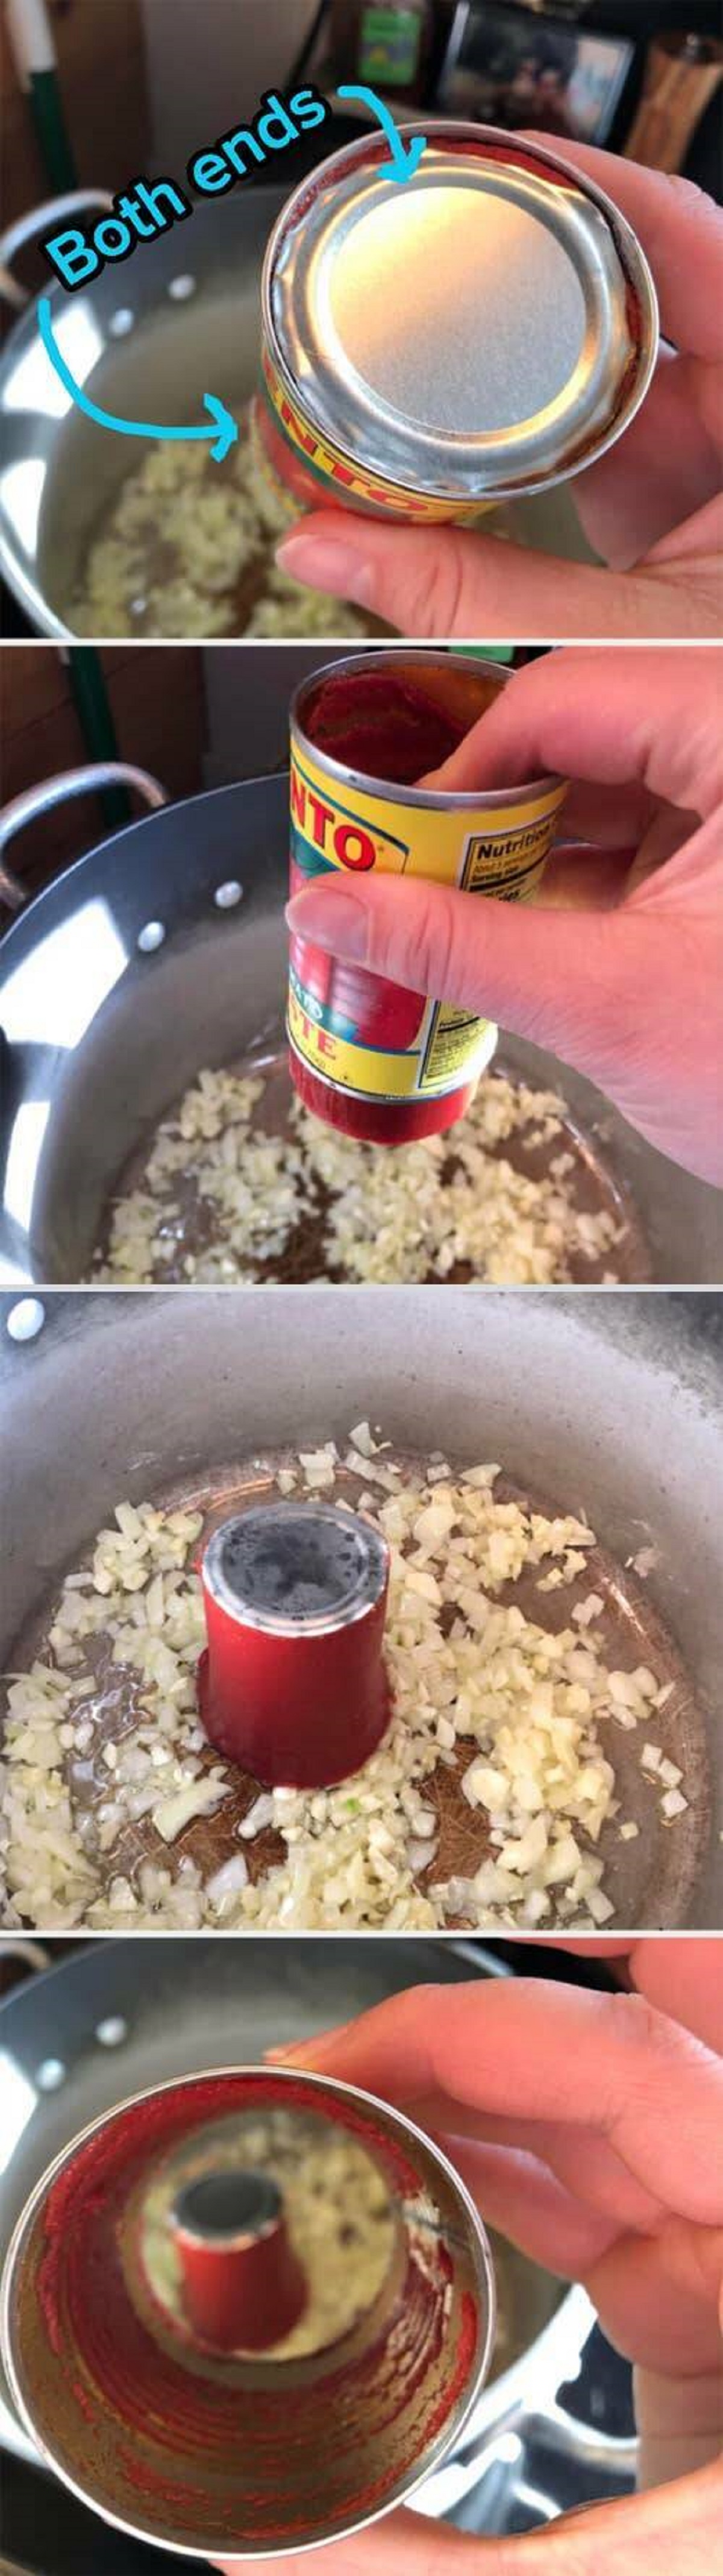 "Canned tomato paste hack. Open both ends of the can, then push the contents out. Voilà."